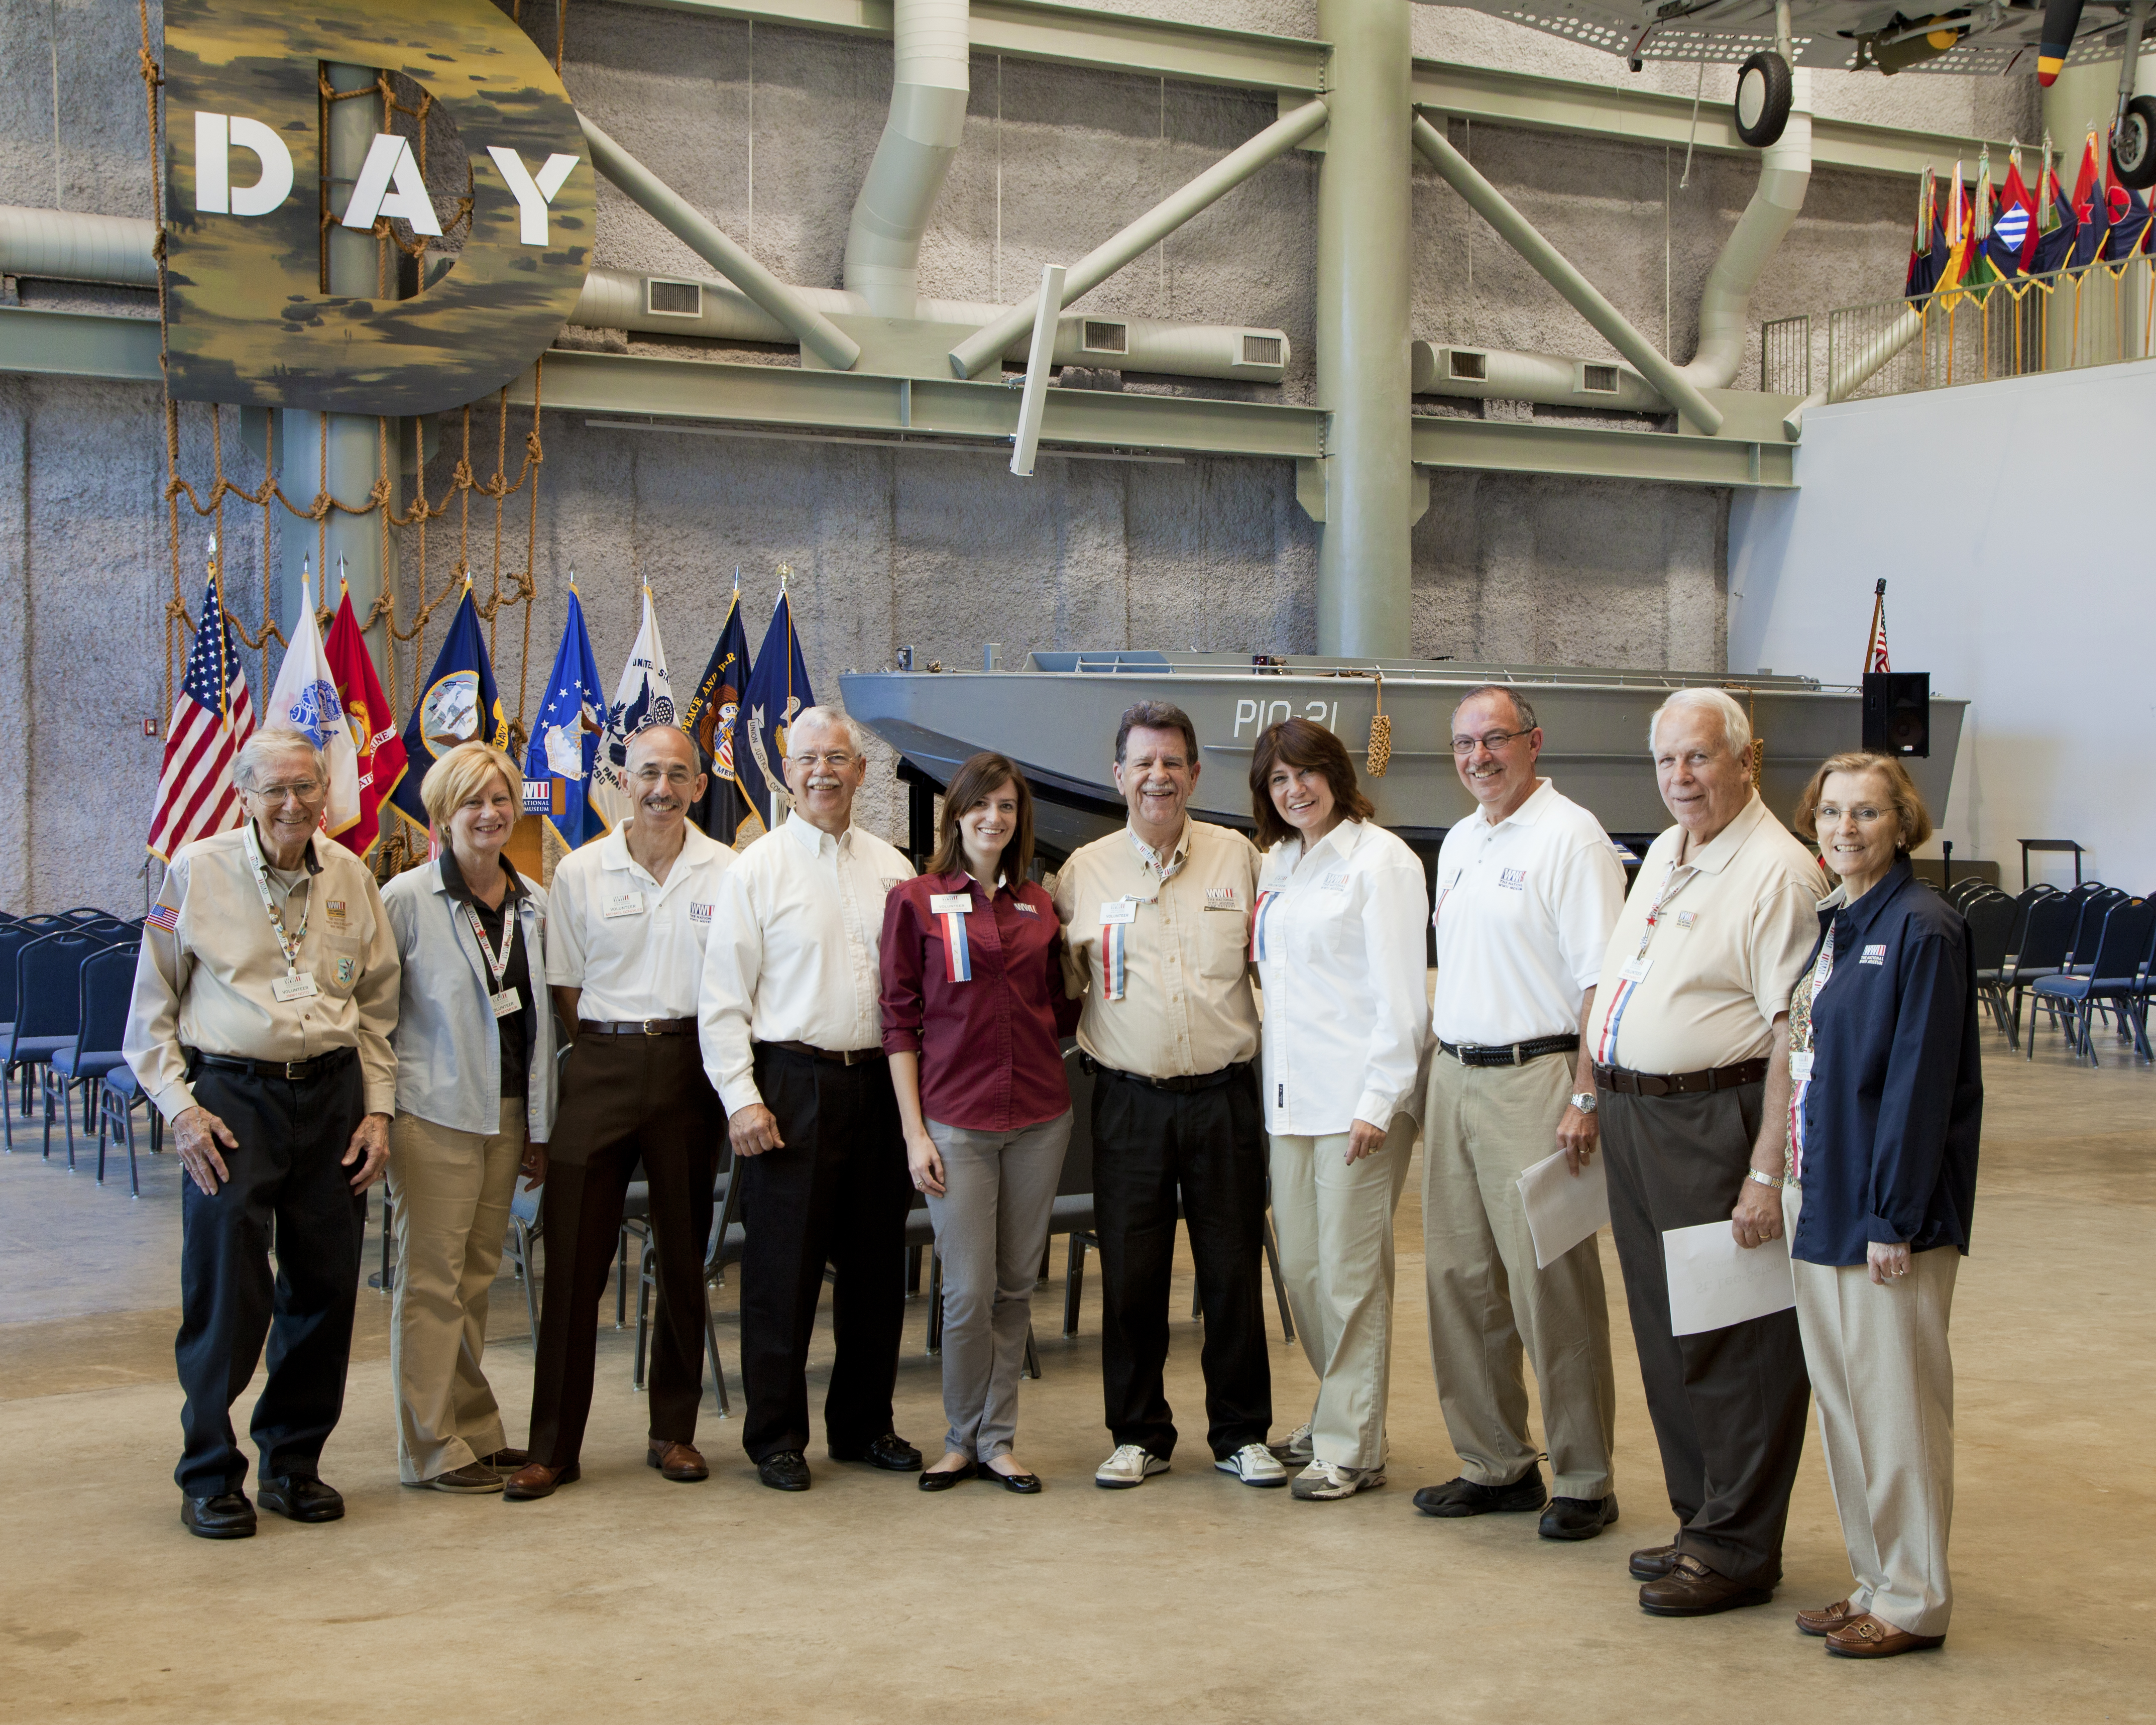 Volunteer staff at The National WWII Museum